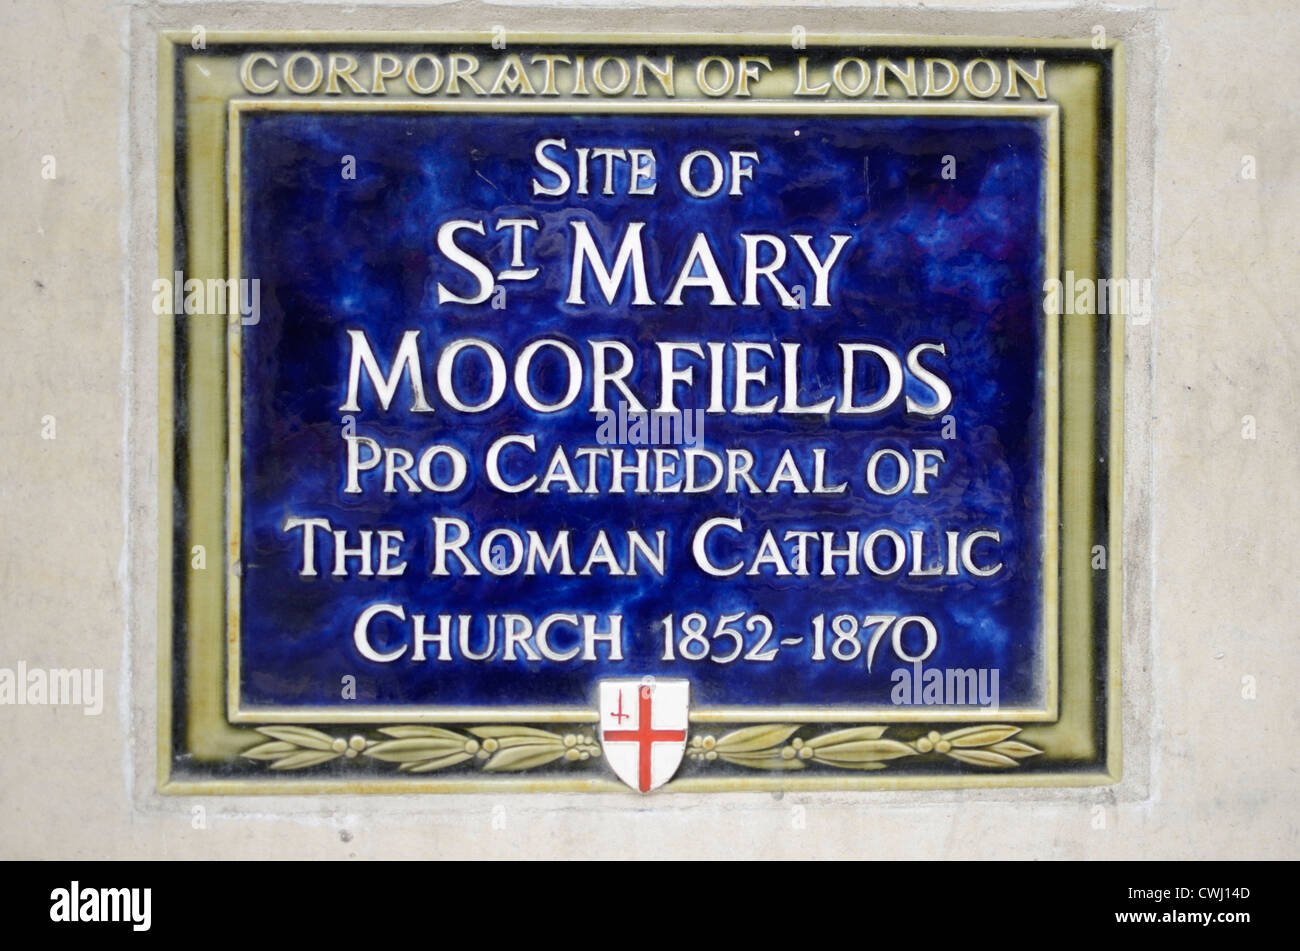 Blue plaque marking the site of St. Mary Moorfields Pro Cathedral of the Roman Catholic Church, Bloomfield St, London Stock Photo